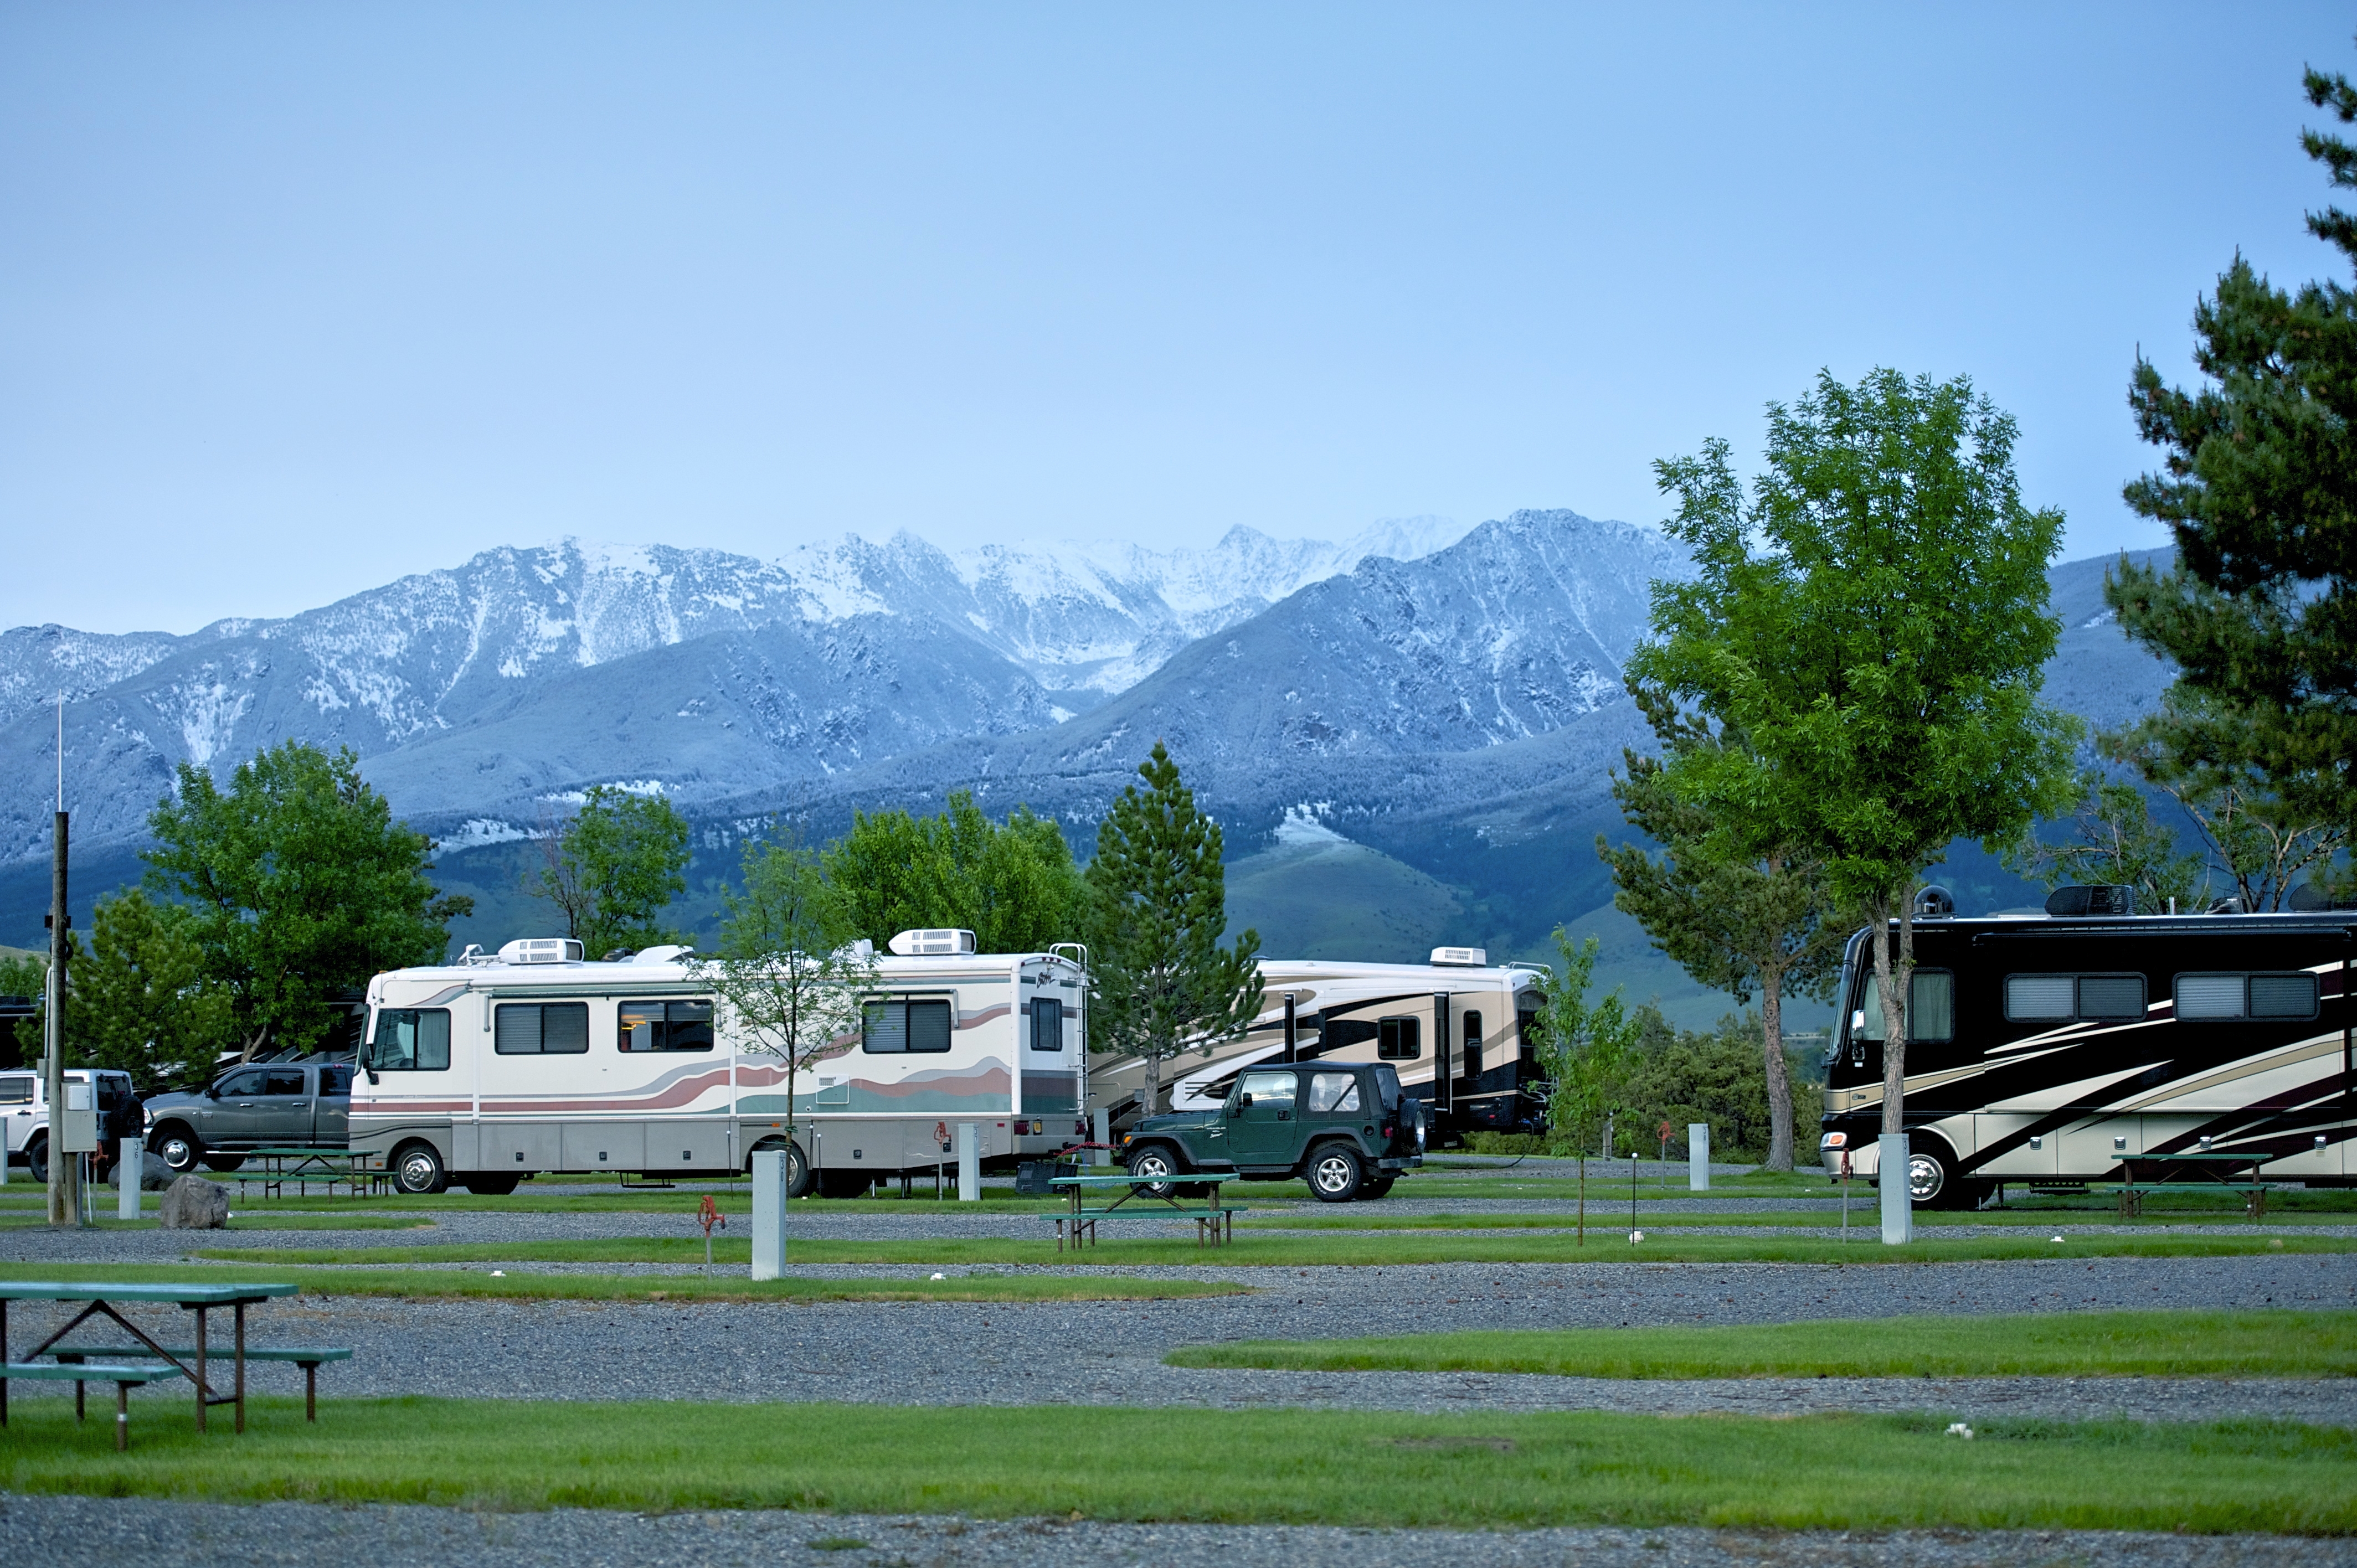 RV park with grass and cement pads. There are snow capped mountains in the background.